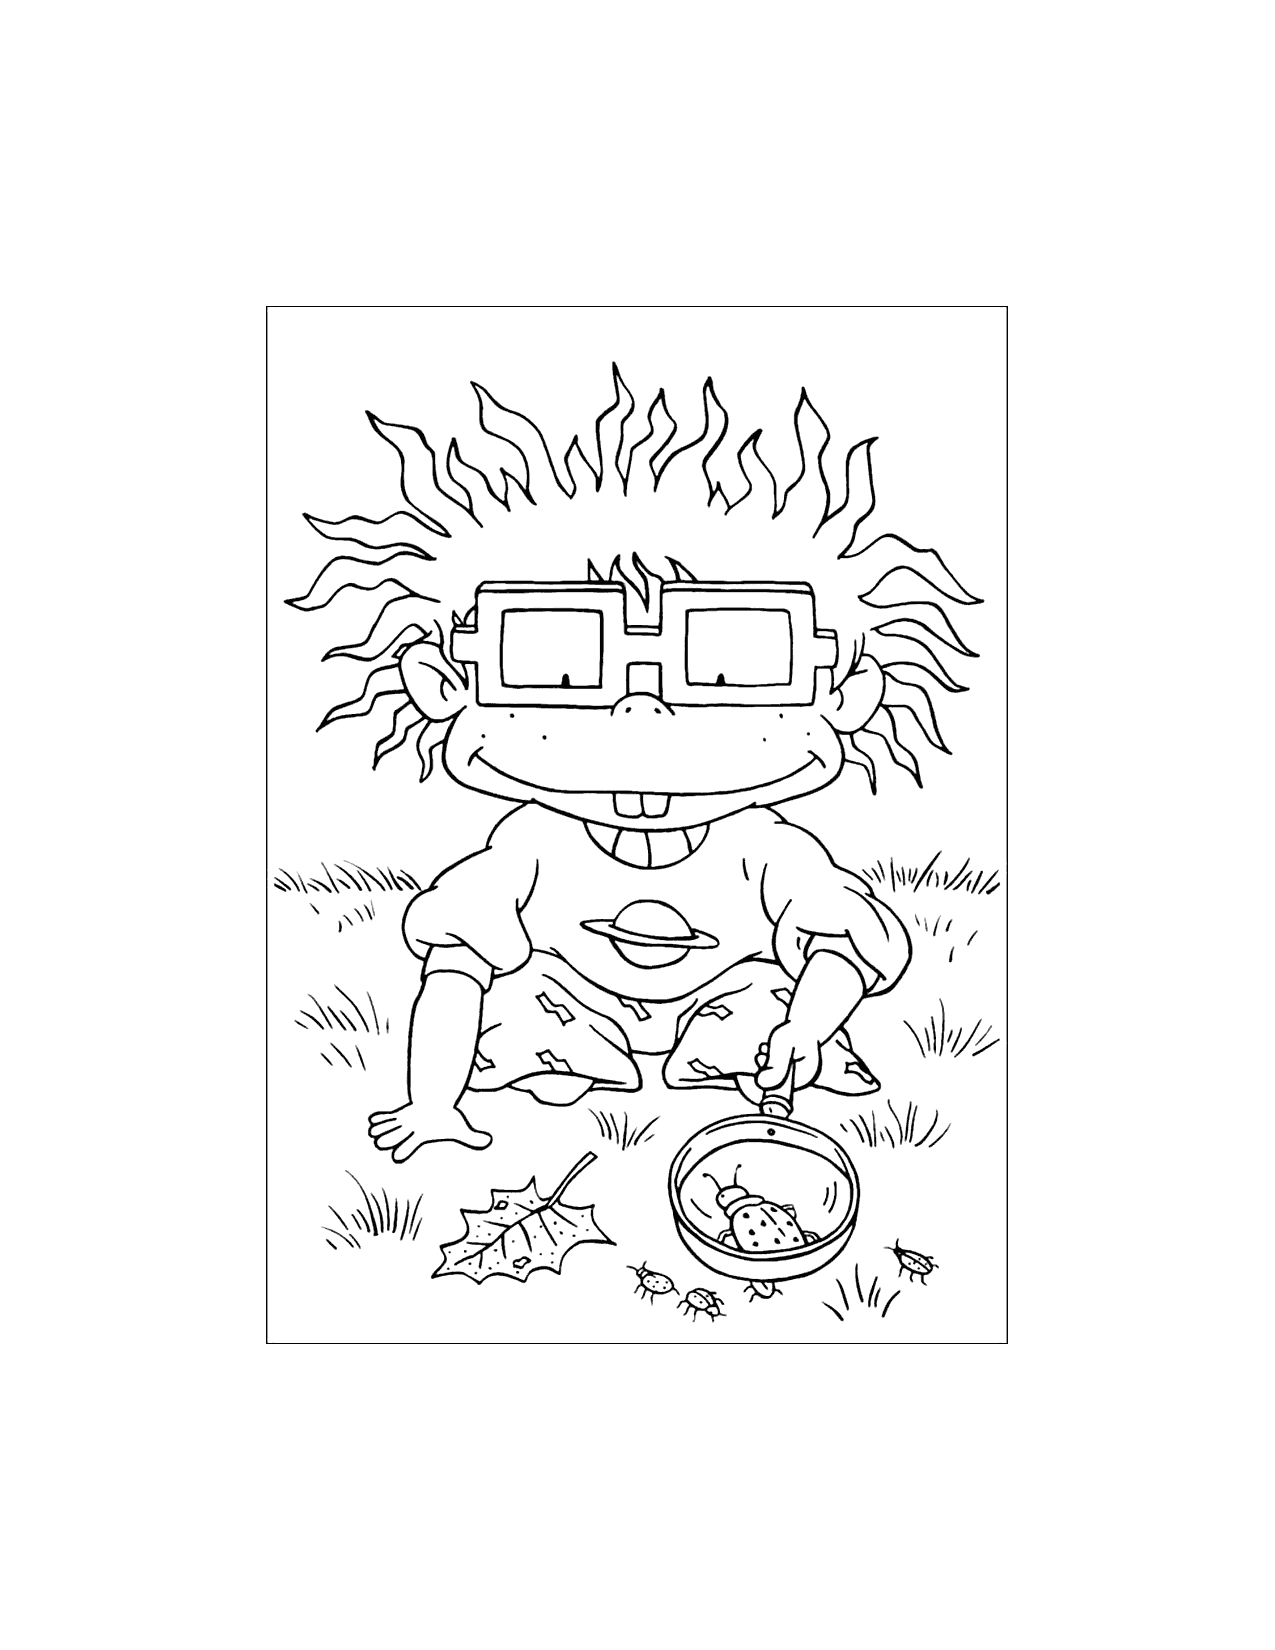 Chuckie Studies Bugs Rugrats Coloring Page